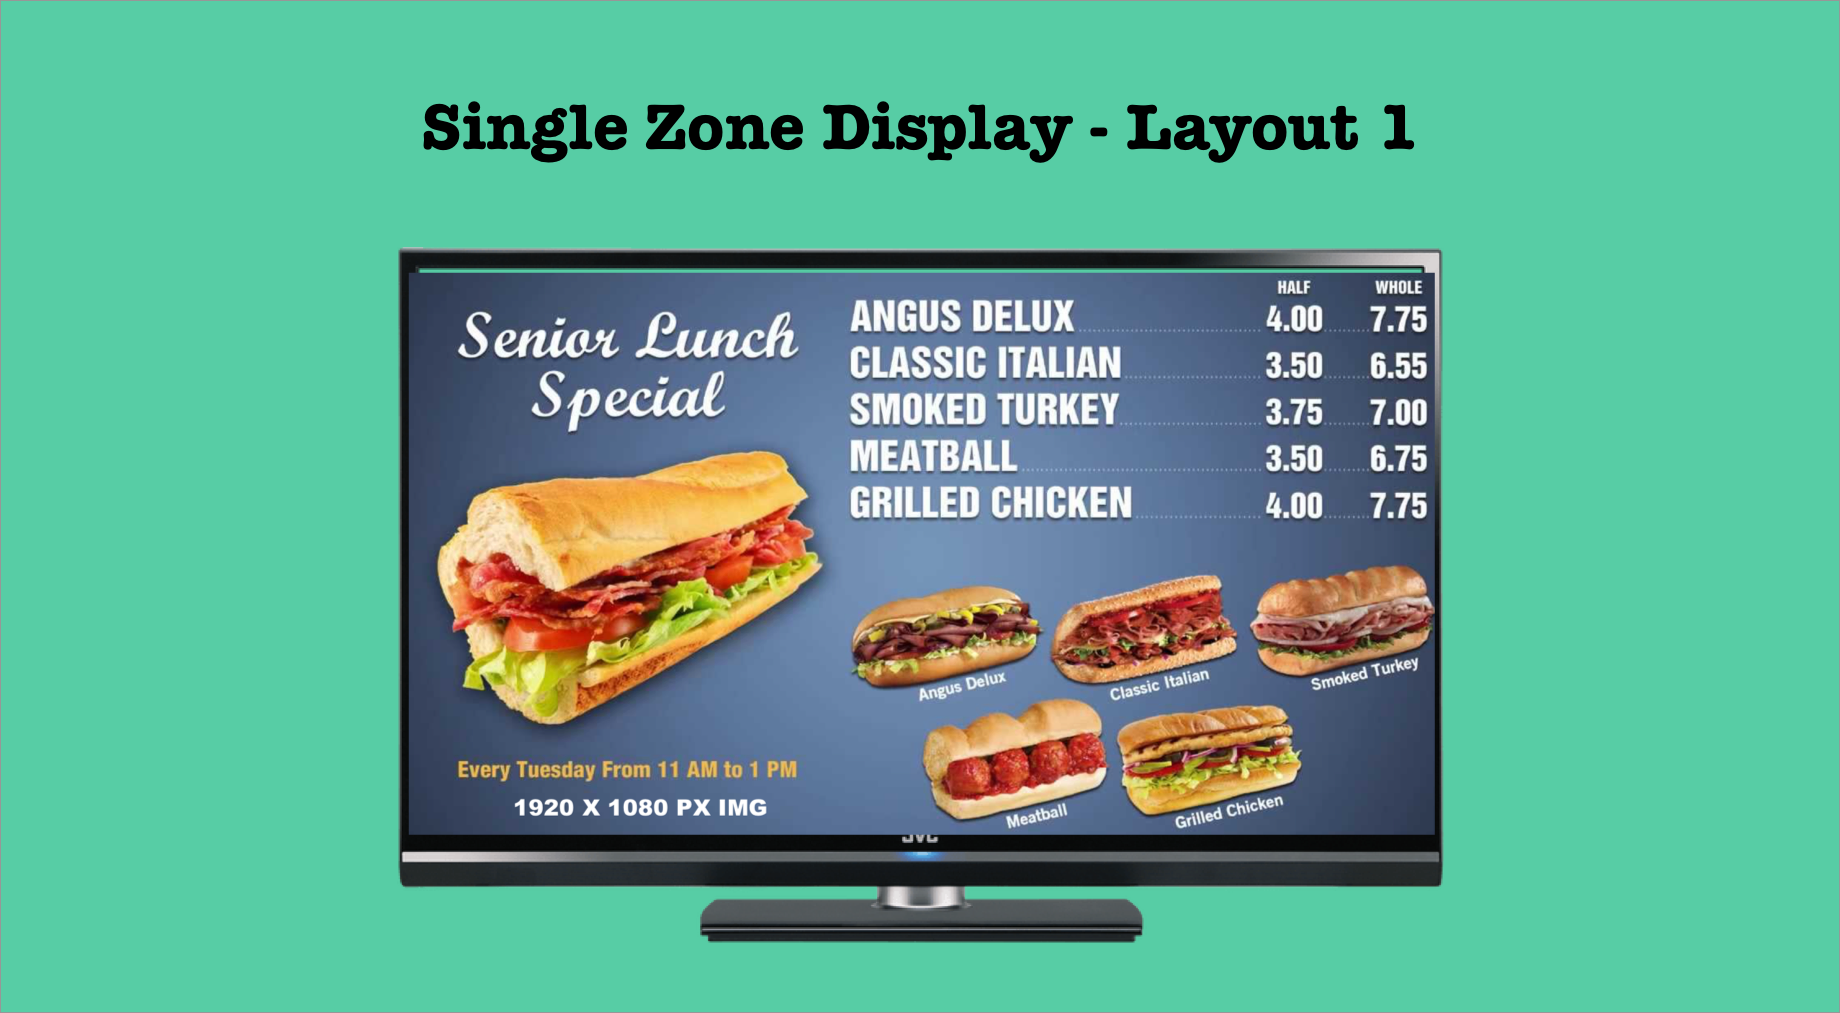 Creating a playlist in piSignage : Part 1 - playlist for a single zone display